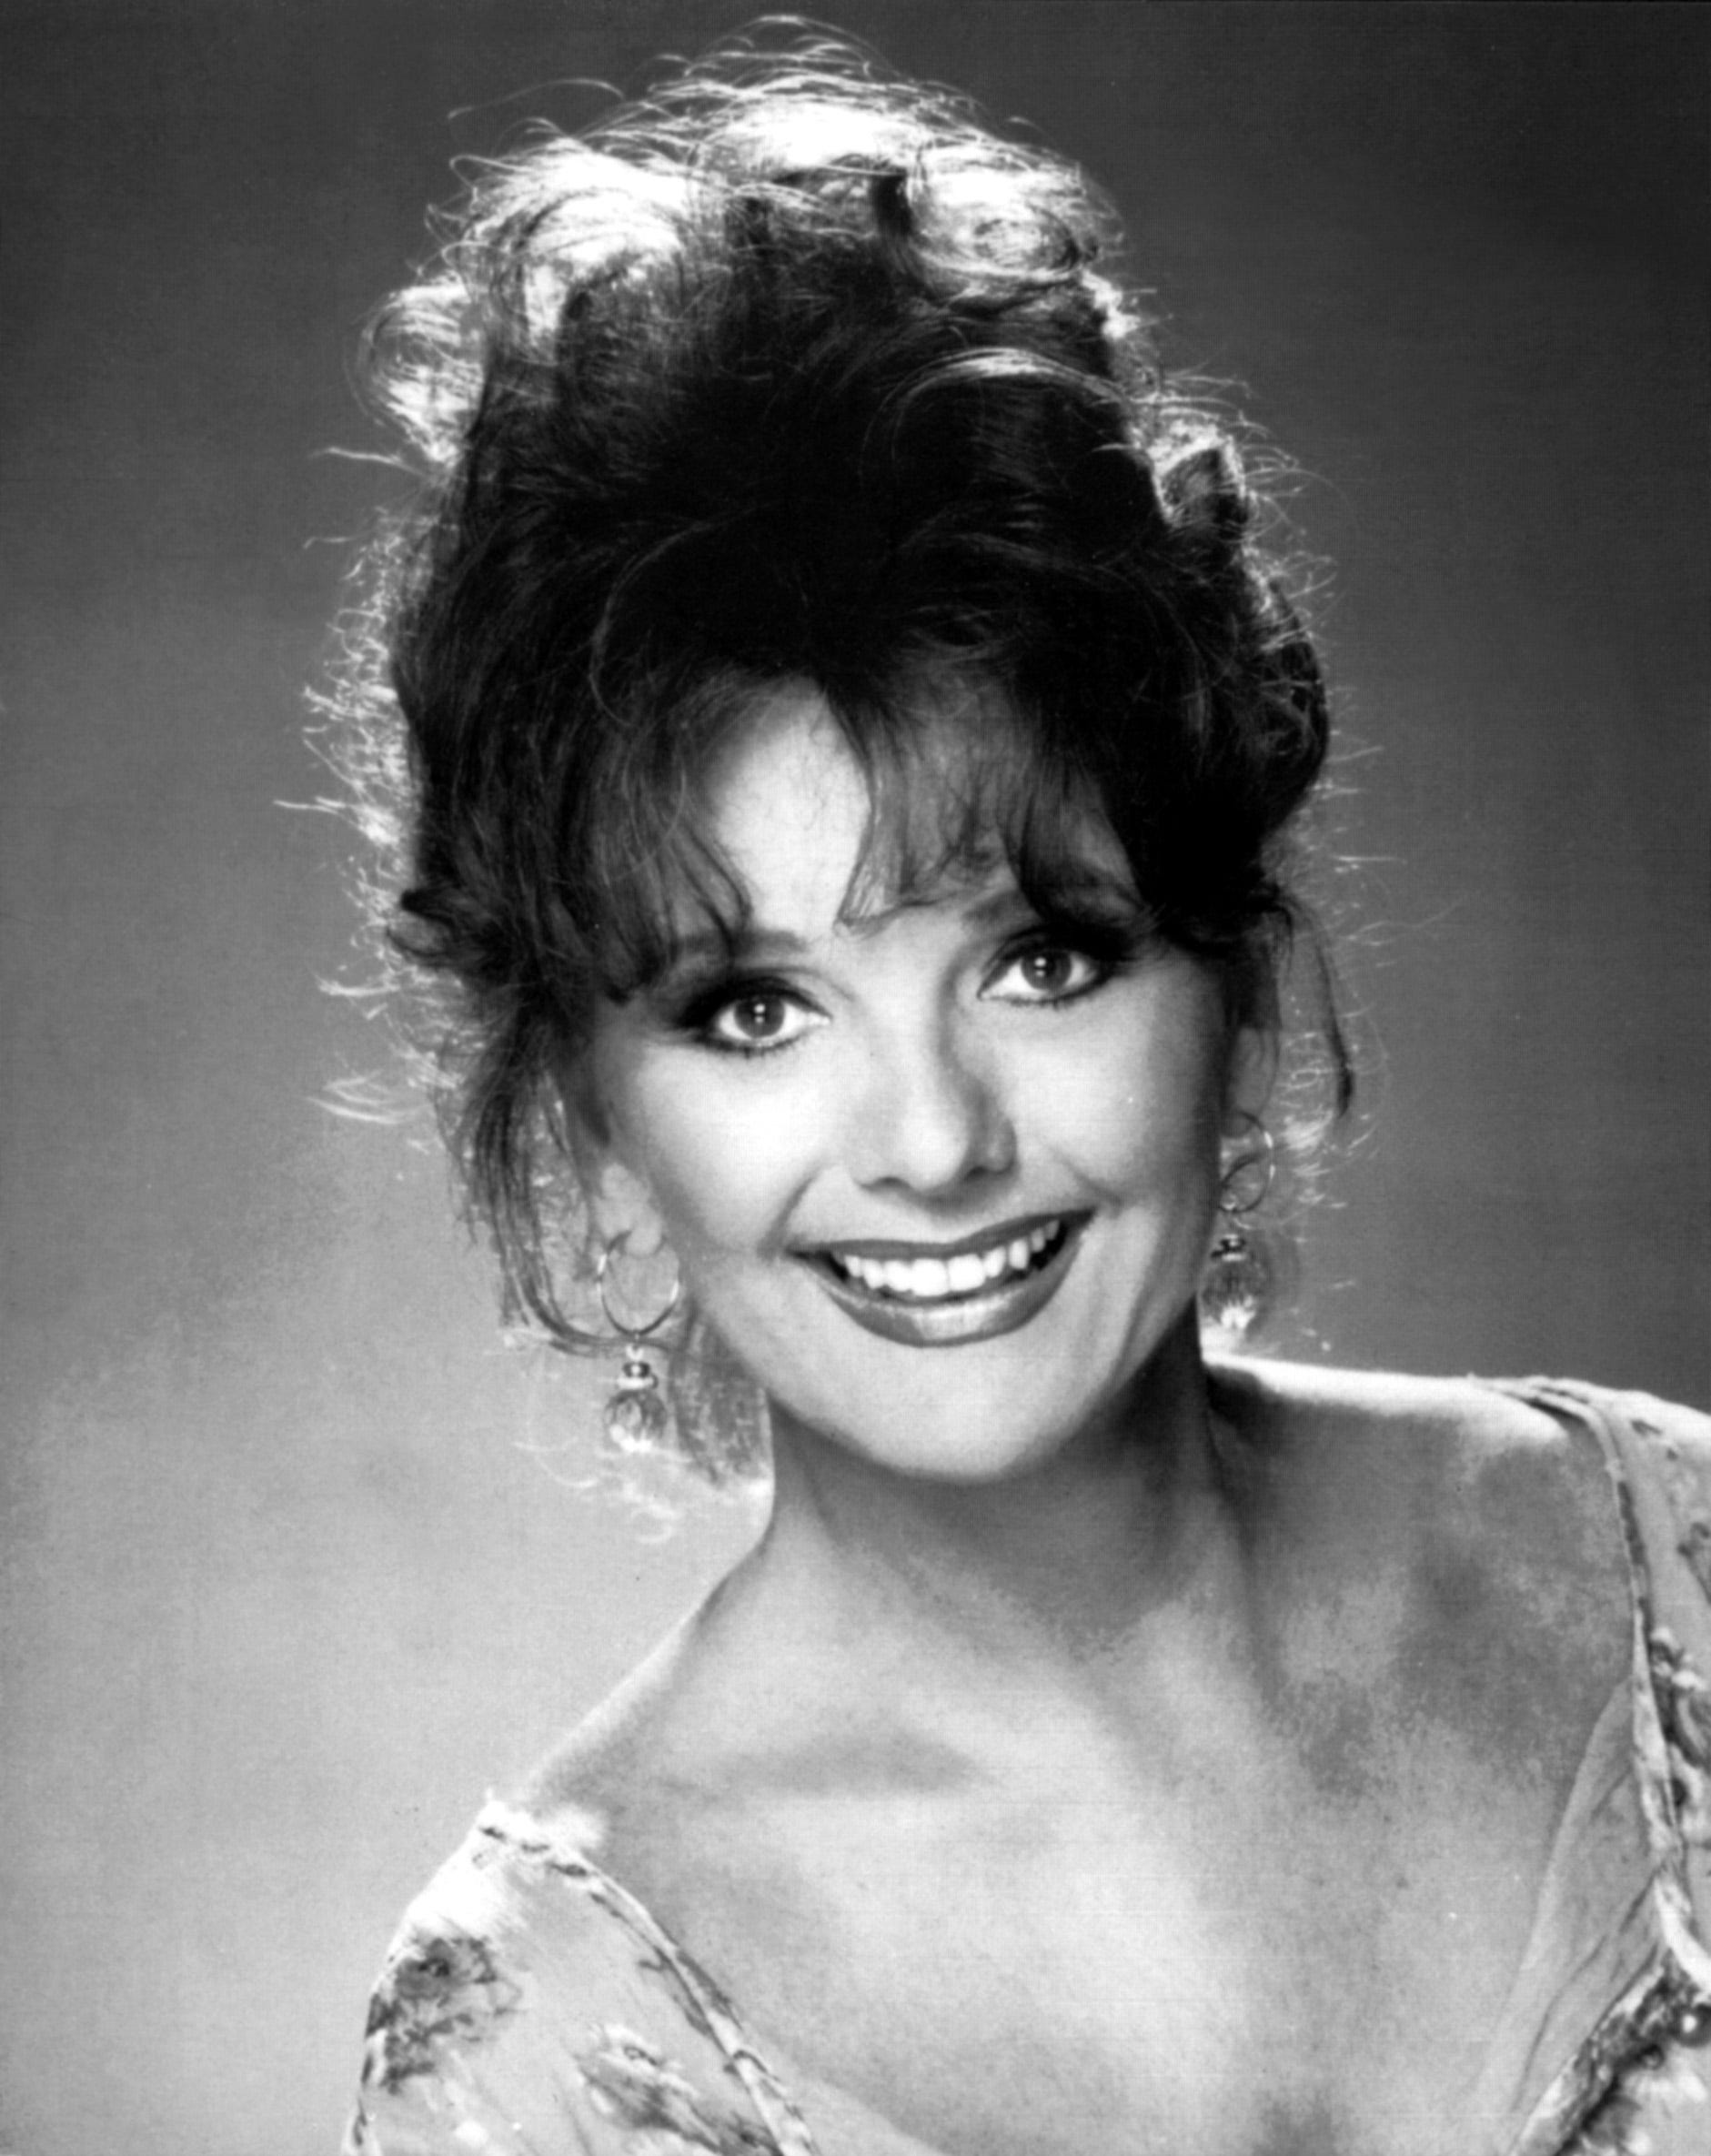 christopher kuehn recommends Dawn Wells Tits